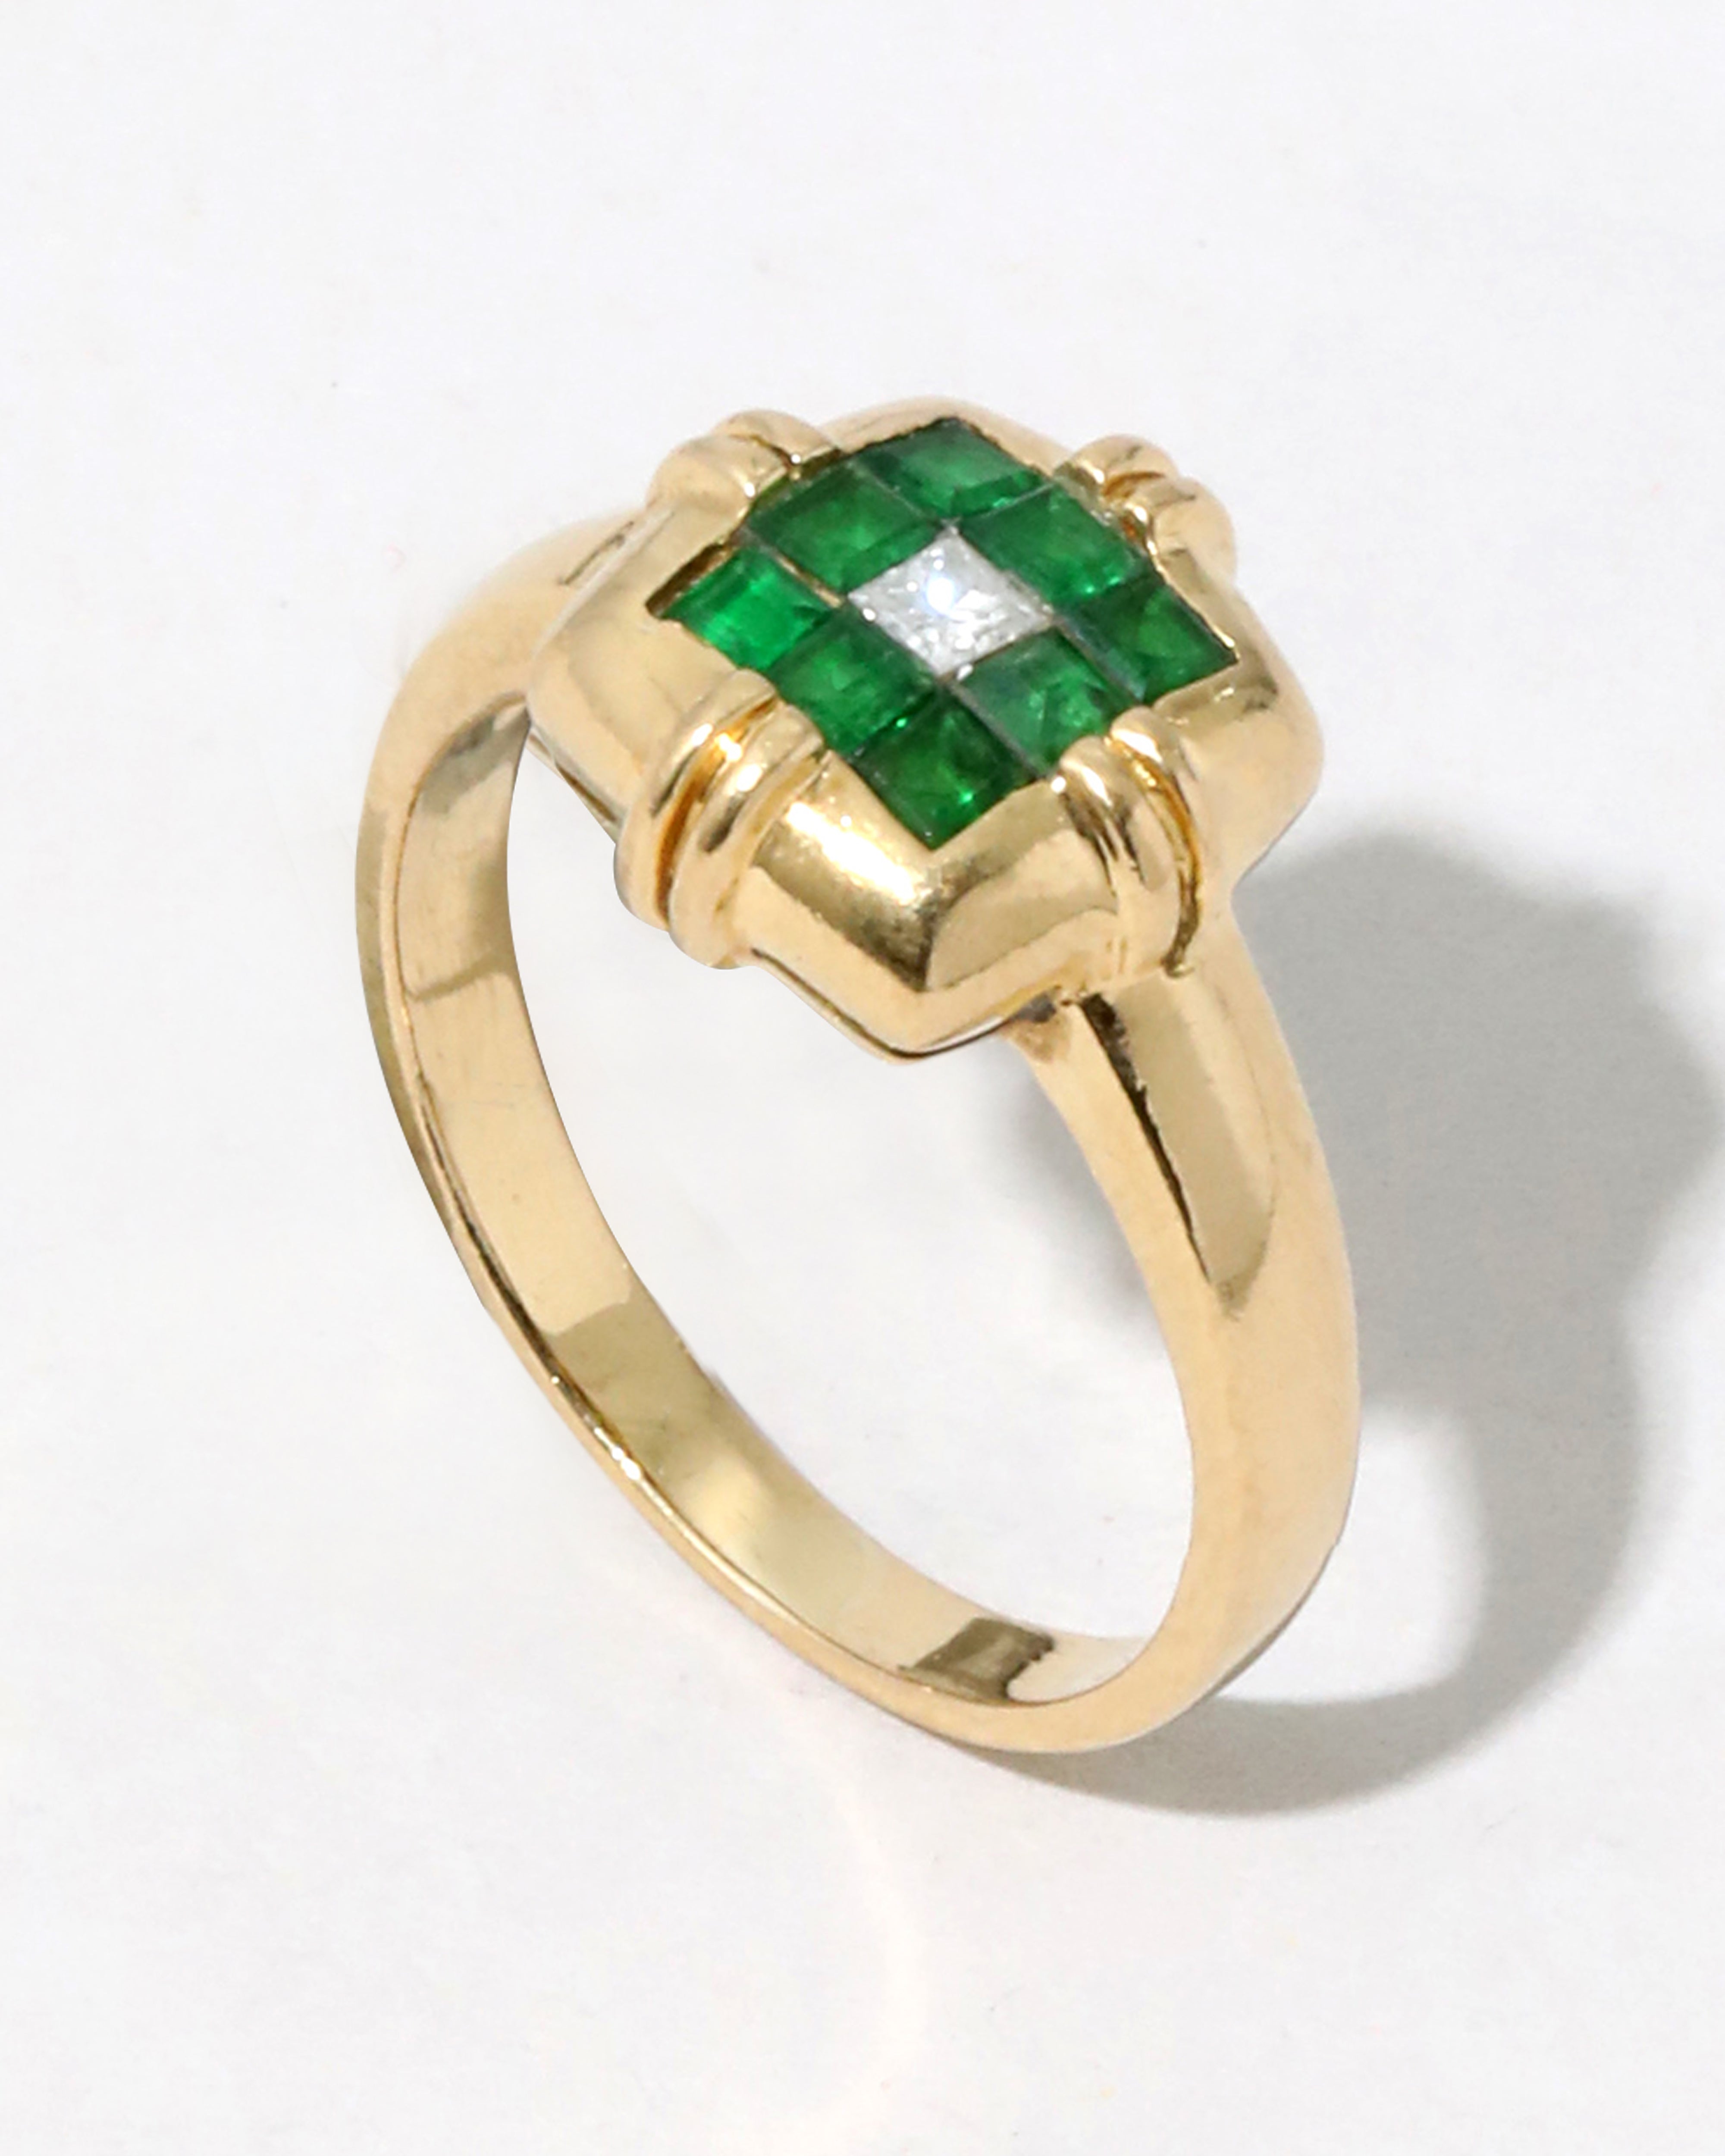 Alexis Bittar Vintage 18K Gold Emerald and Diamond Geometric Ring | Statement Jewelry from Alexis Bittar